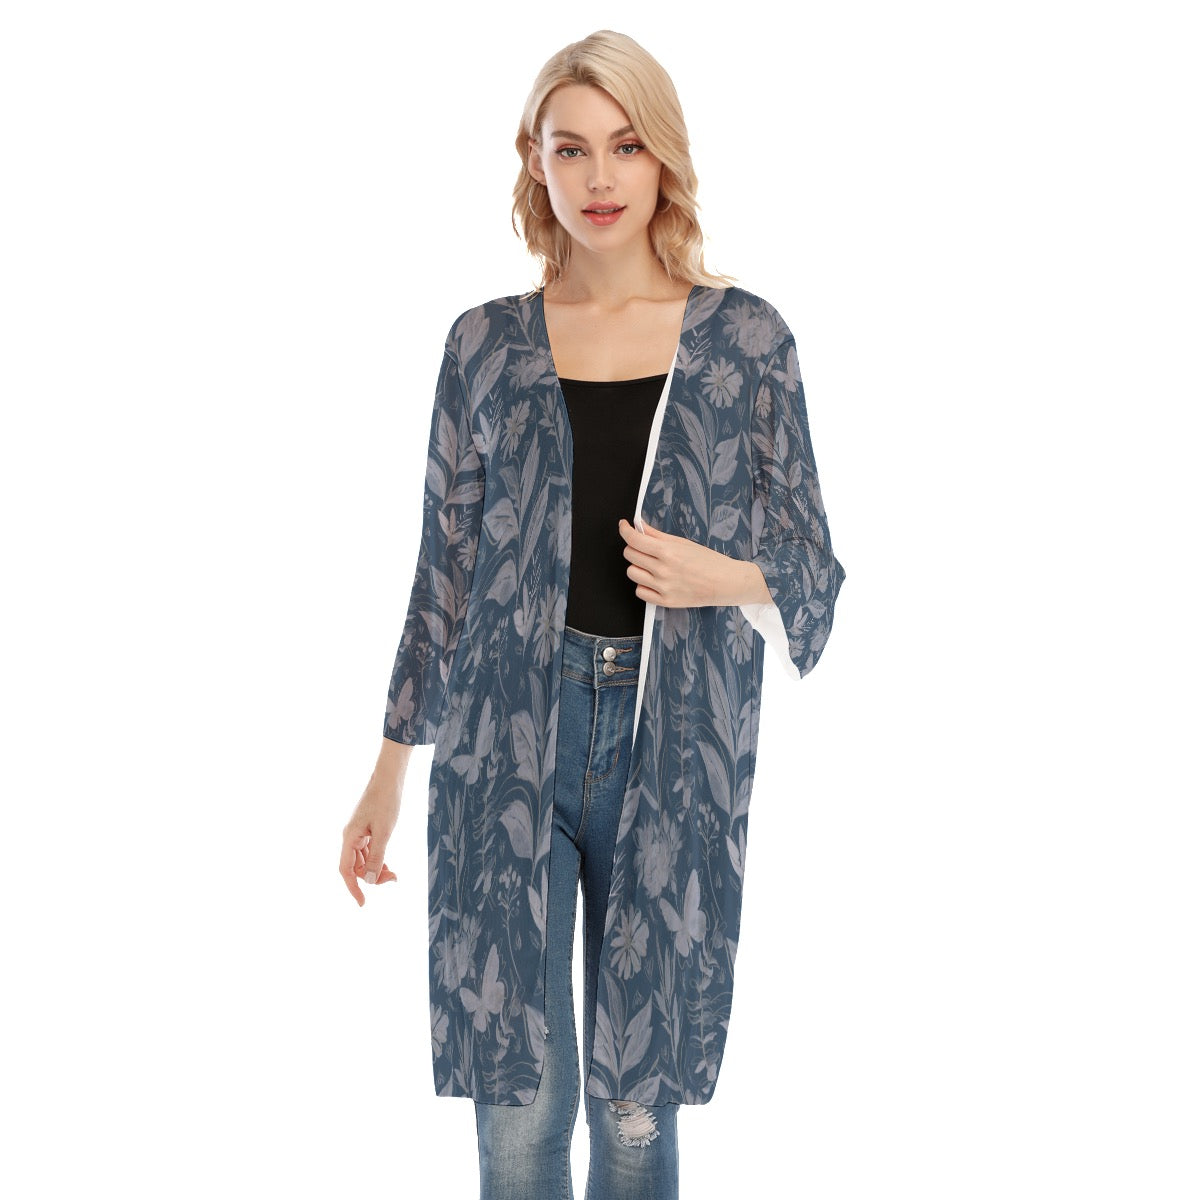 Watercolor Blue V-neck Mesh Cardigan. Mesh Kimono. Houston Collection. Design hand-painted by the Designer Maria Alejand